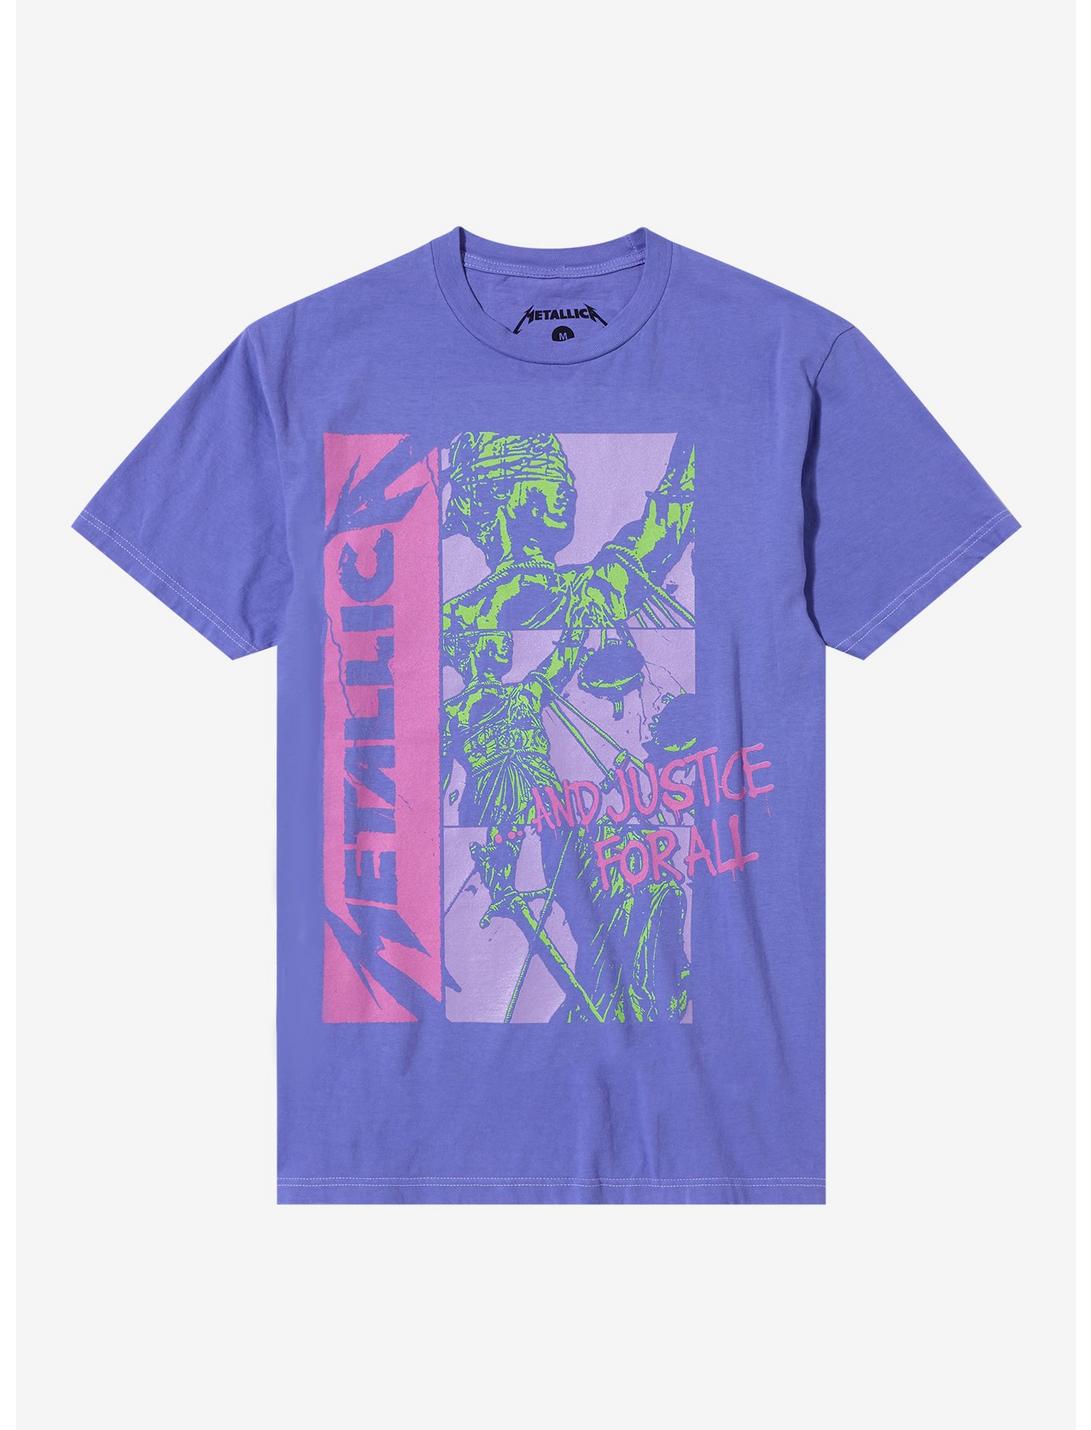 Metallica ...And Justice For All Pastel Boyfriend Fit Girls T-Shirt, LAVENDER, hi-res